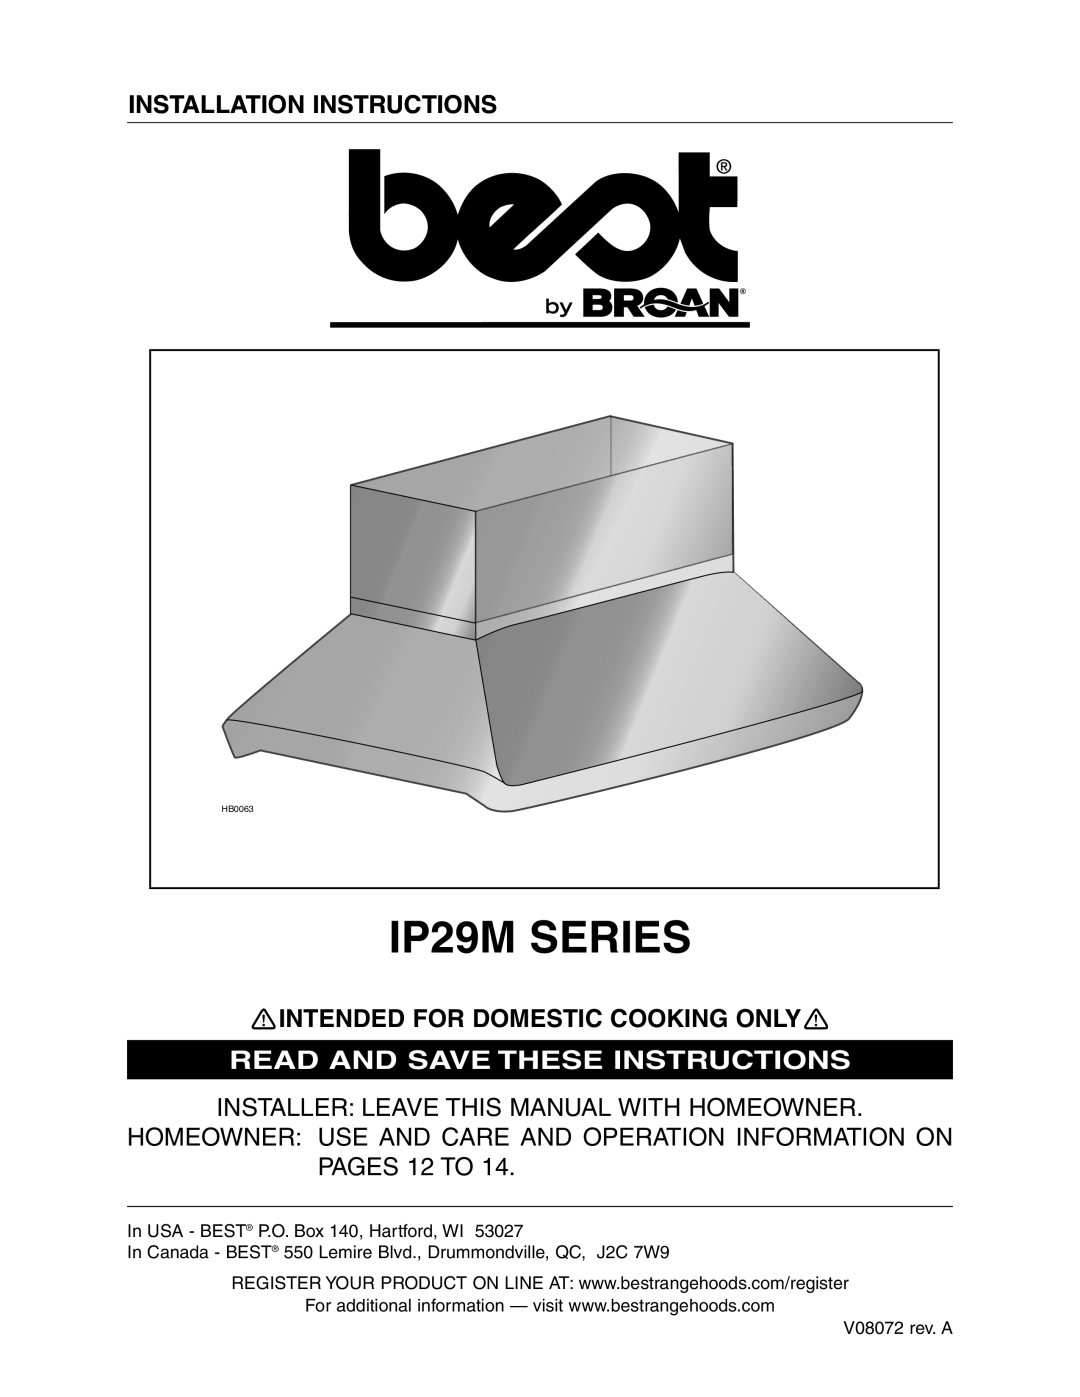 Best IP29M Series installation instructions Installation Instructions, Intended For Domestic Cooking Only, IP29M SERIES 